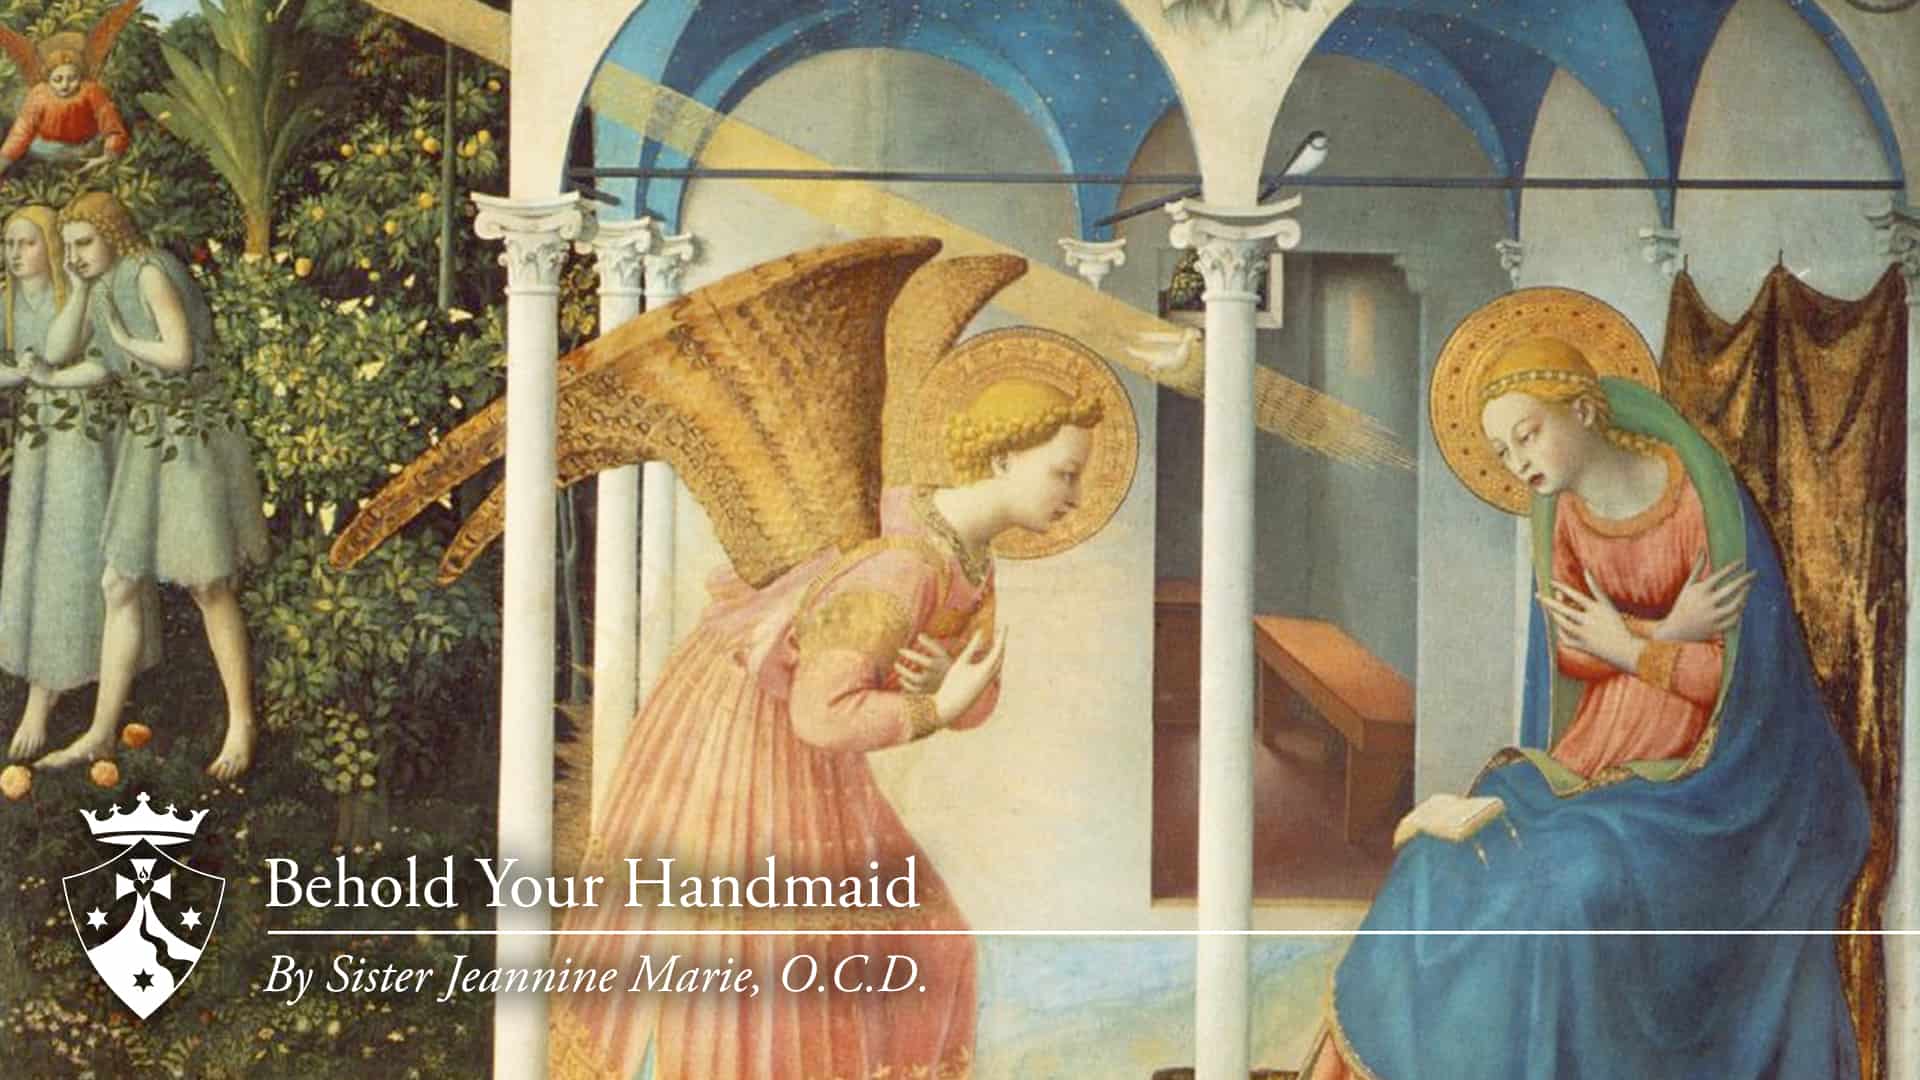 Angel Gabriel coming to Mary, 'Behold Your Handmaid, by Sister Jeannine Marie, O.C.D.'